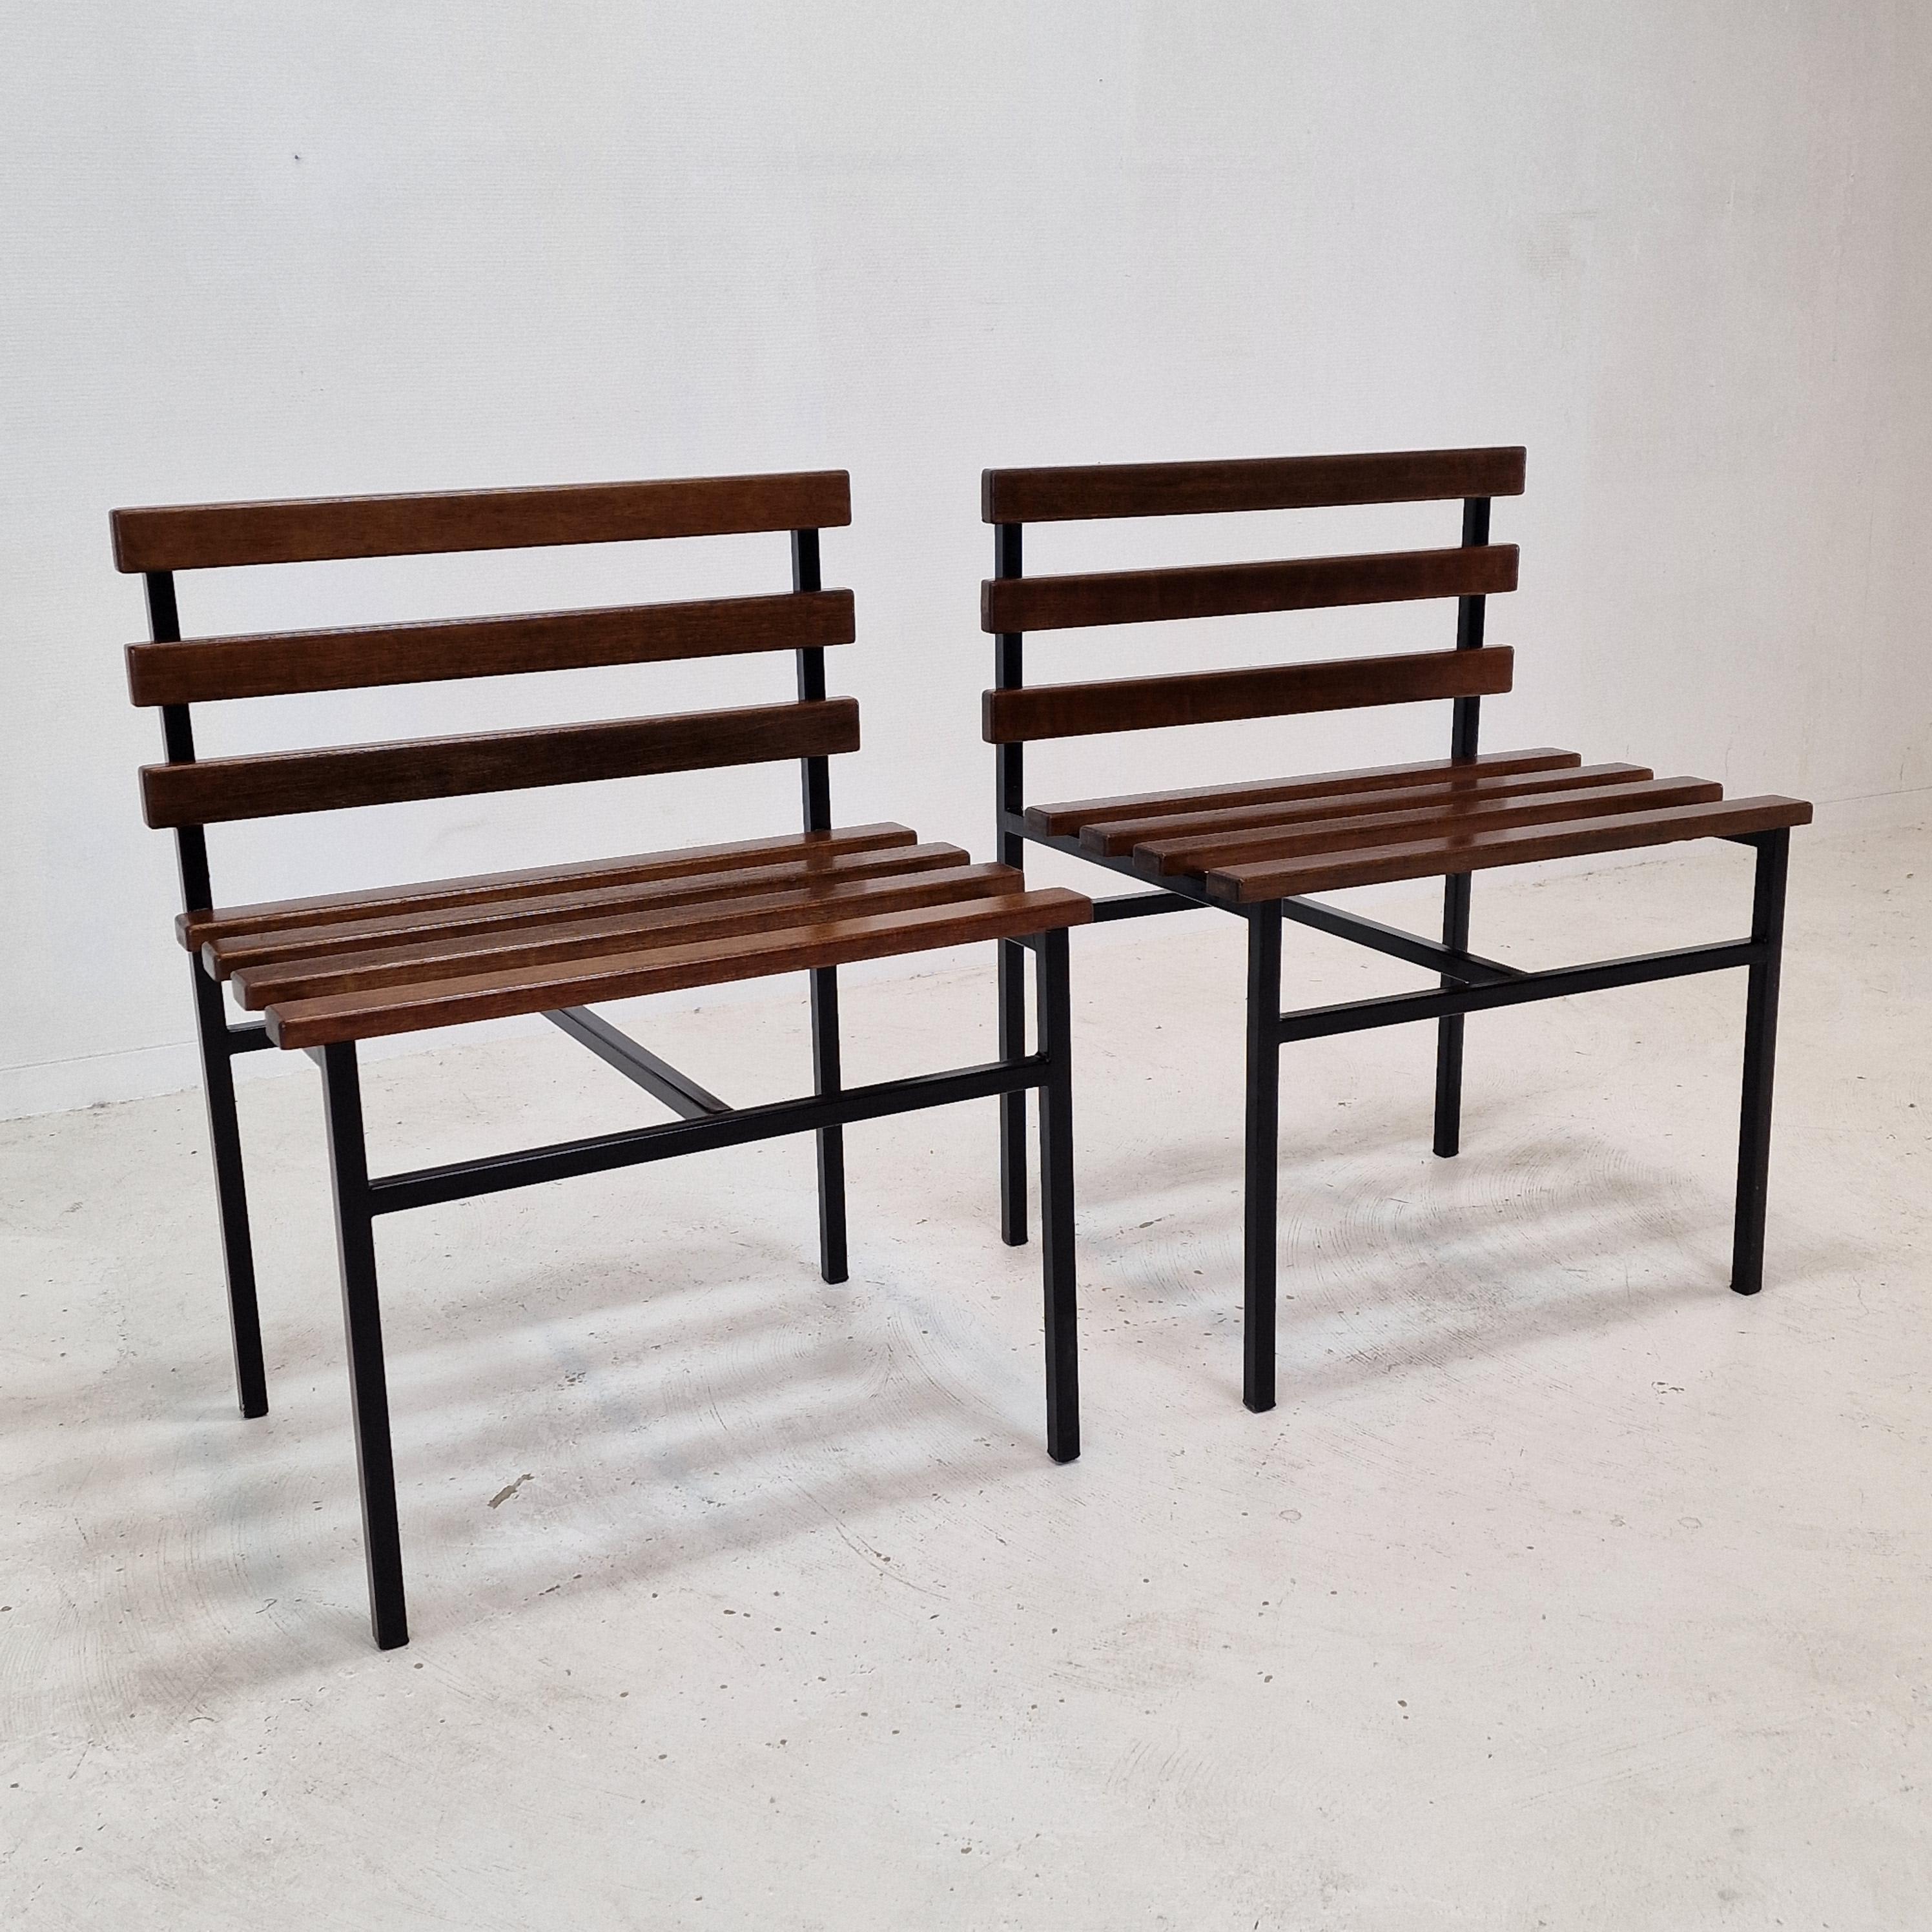 Midcentury Set of 2 Chairs or Benches in Teak, Italy, 1960s For Sale 1